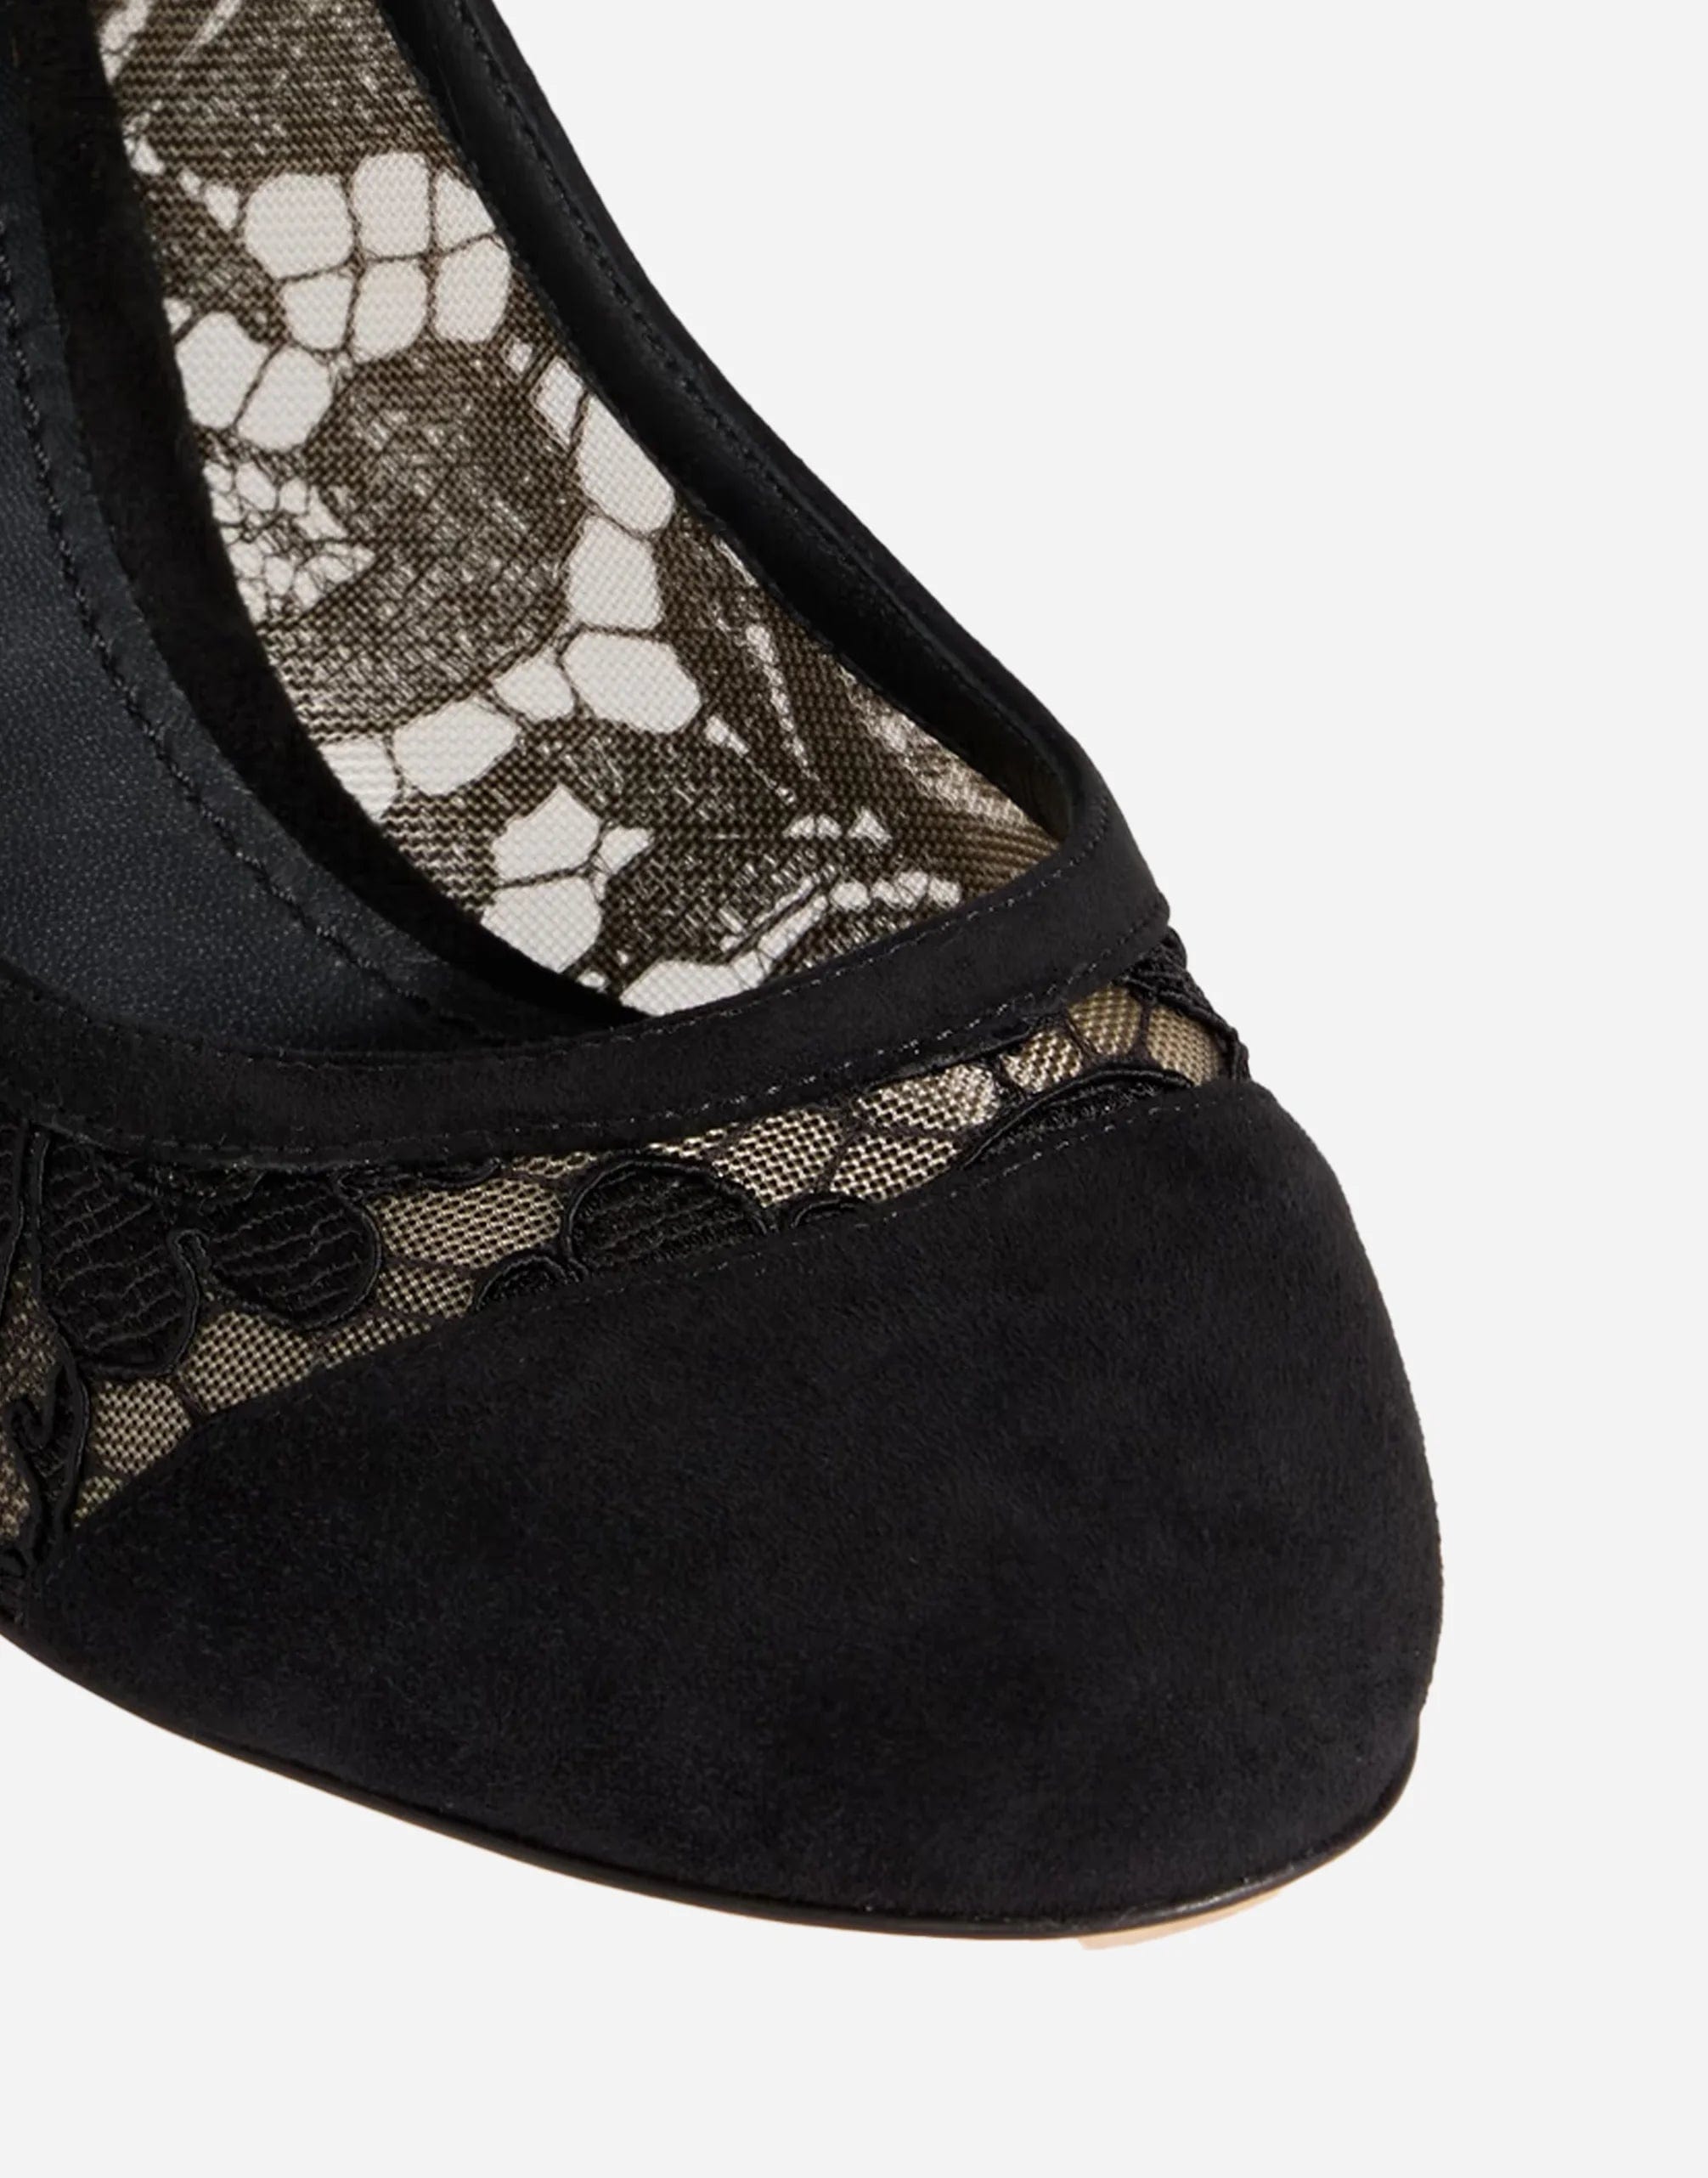 Corded Lace Mary Jane Pumps